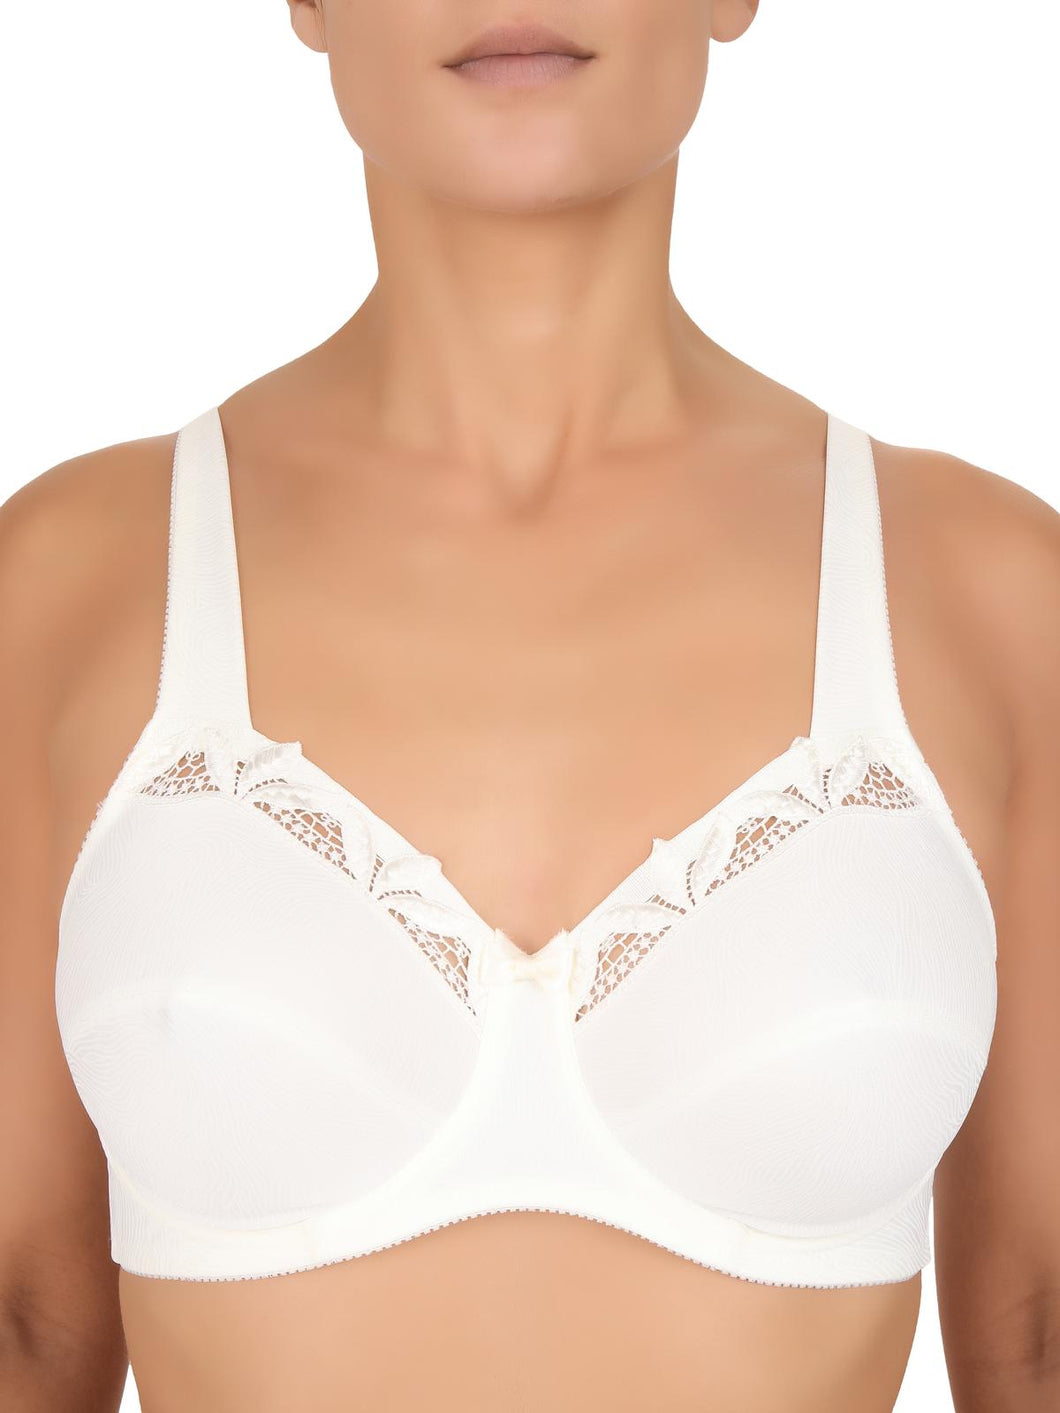 wired bra 527 6 Natural